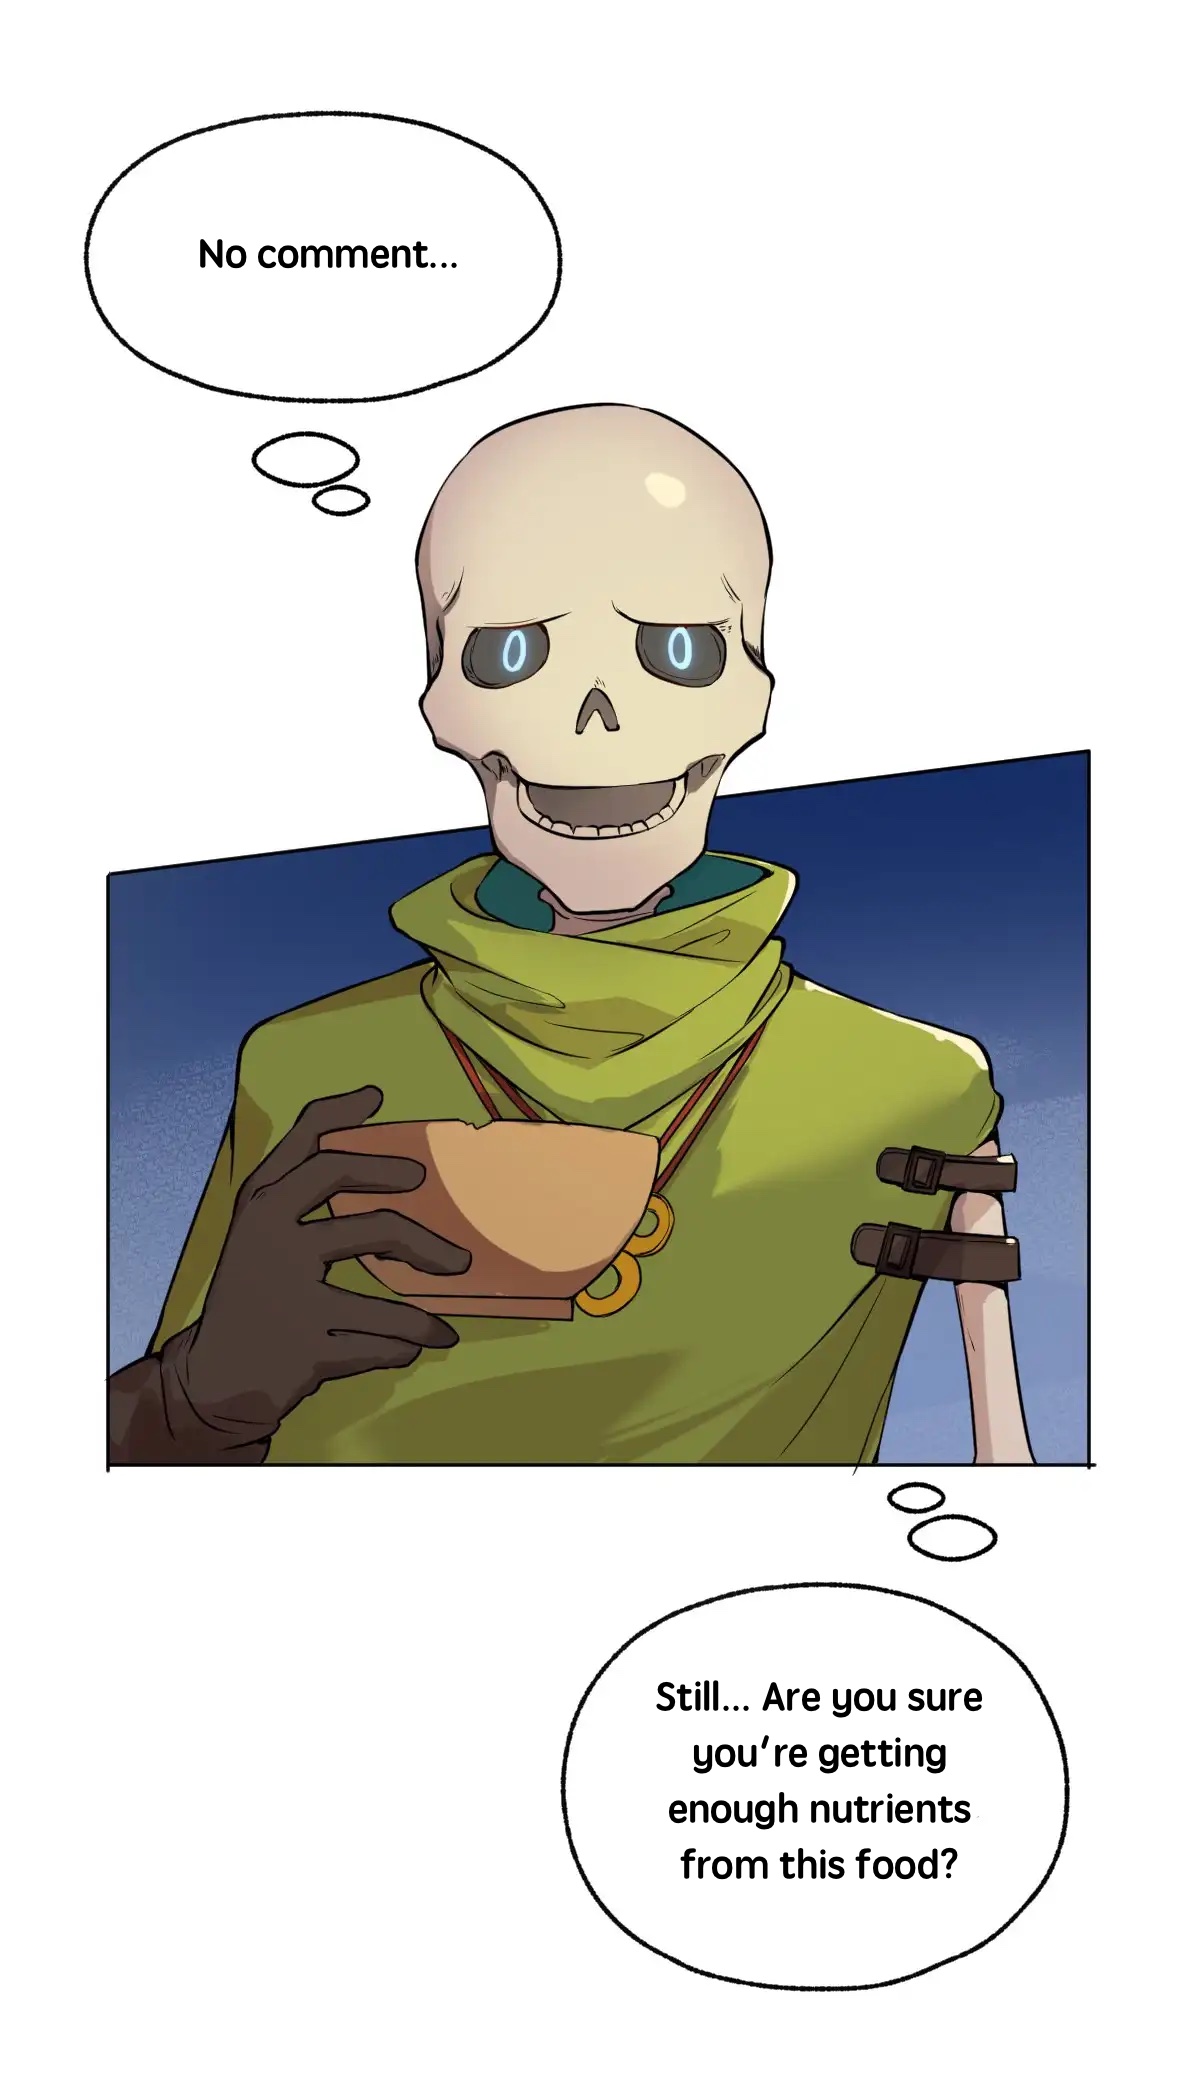 Little Skeleton Ch. 6 Getting straight to the point is a good quality!